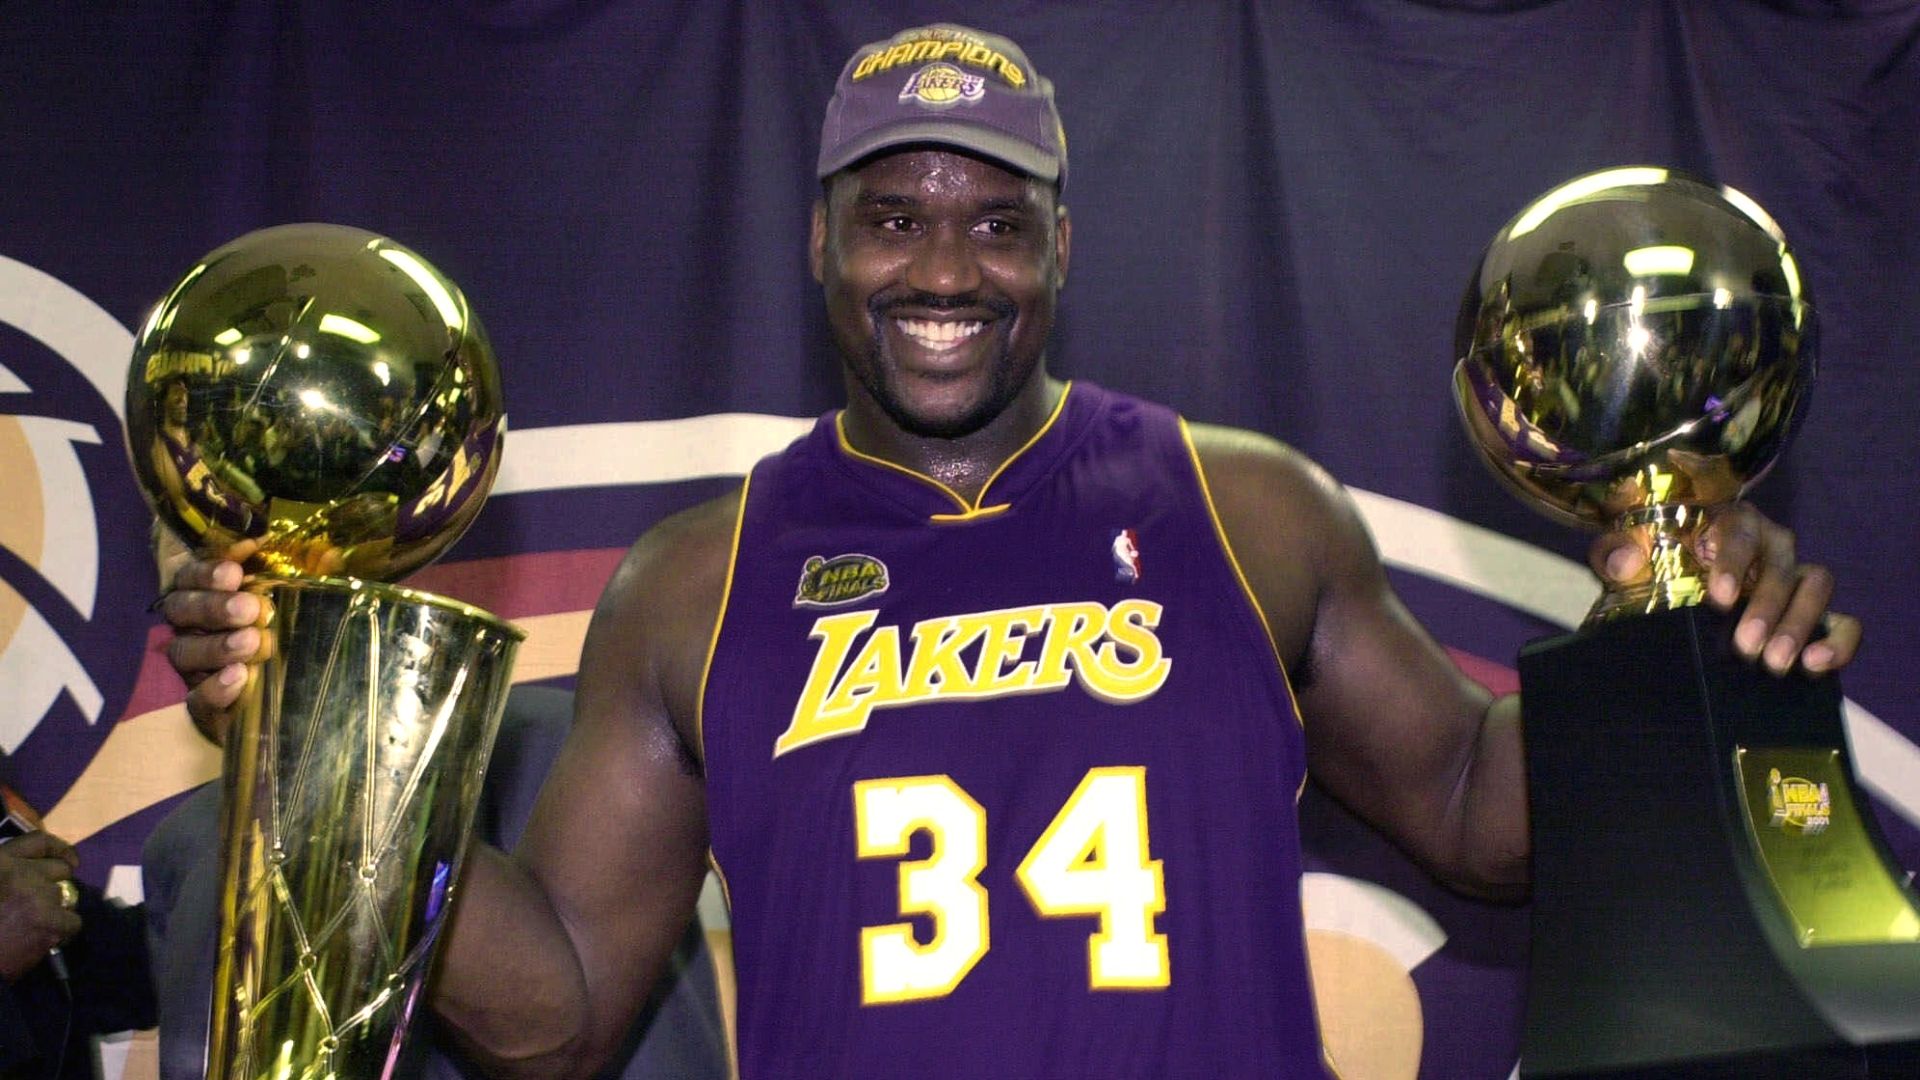 Shaq in his own words